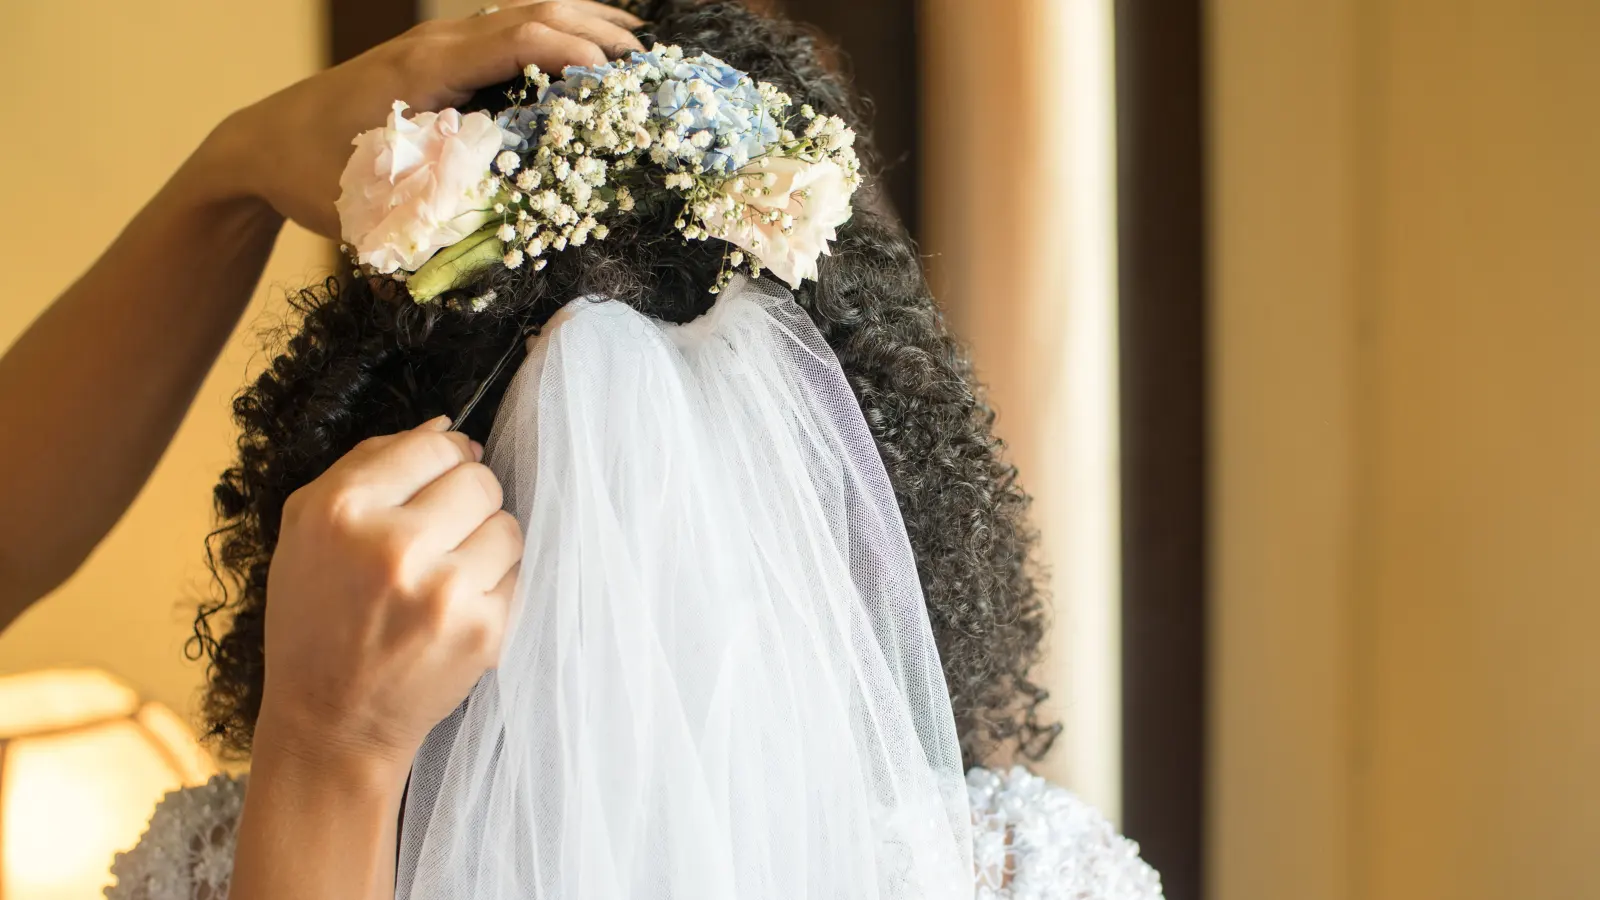 How to Make a Veil Without Sewing: No-sew Wedding Veil Tutorial